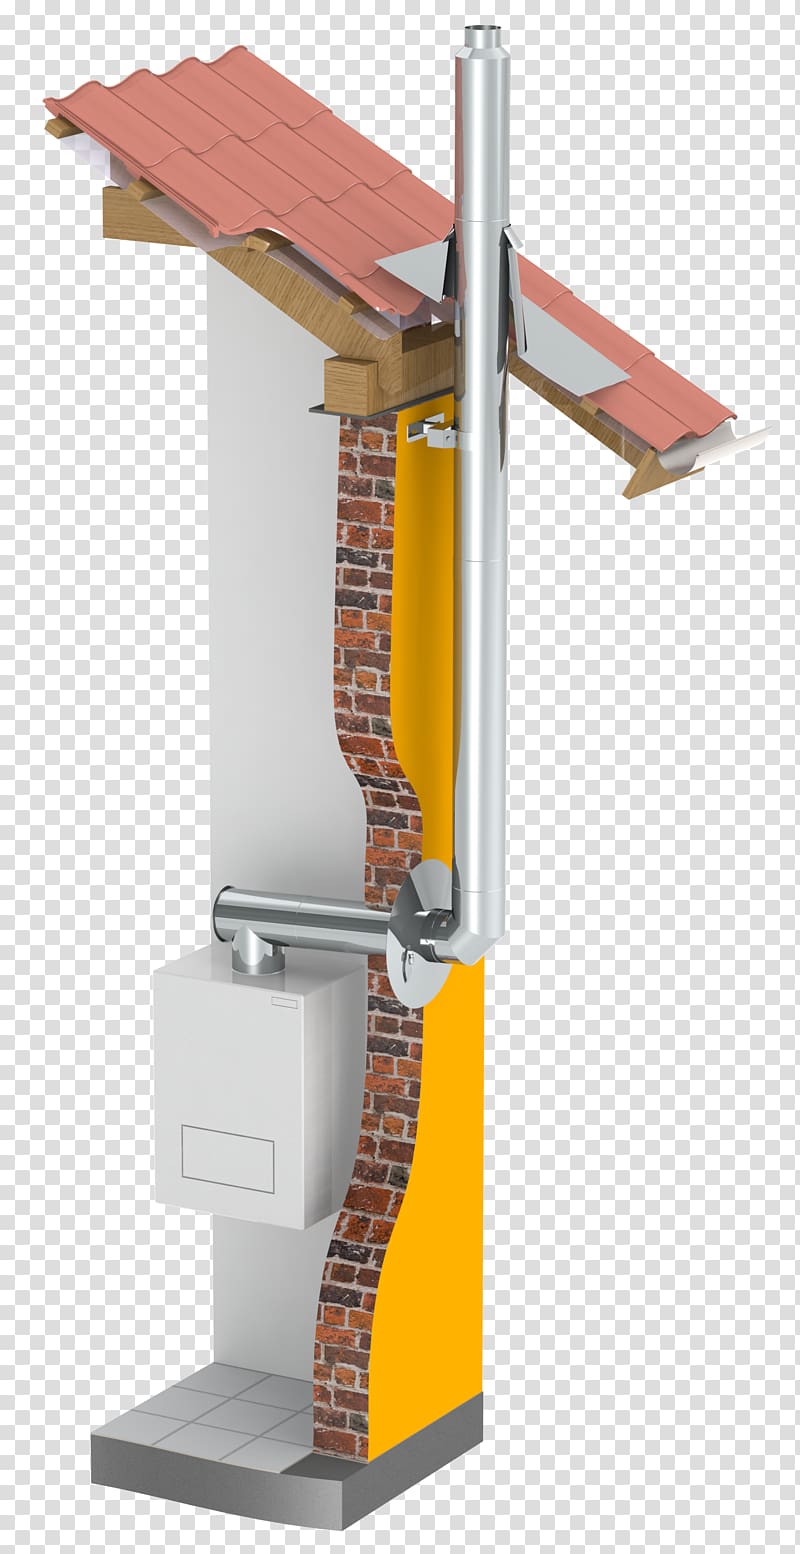 Condensing boiler Canna fumaria Chimney Condensation, dw software transparent background PNG clipart